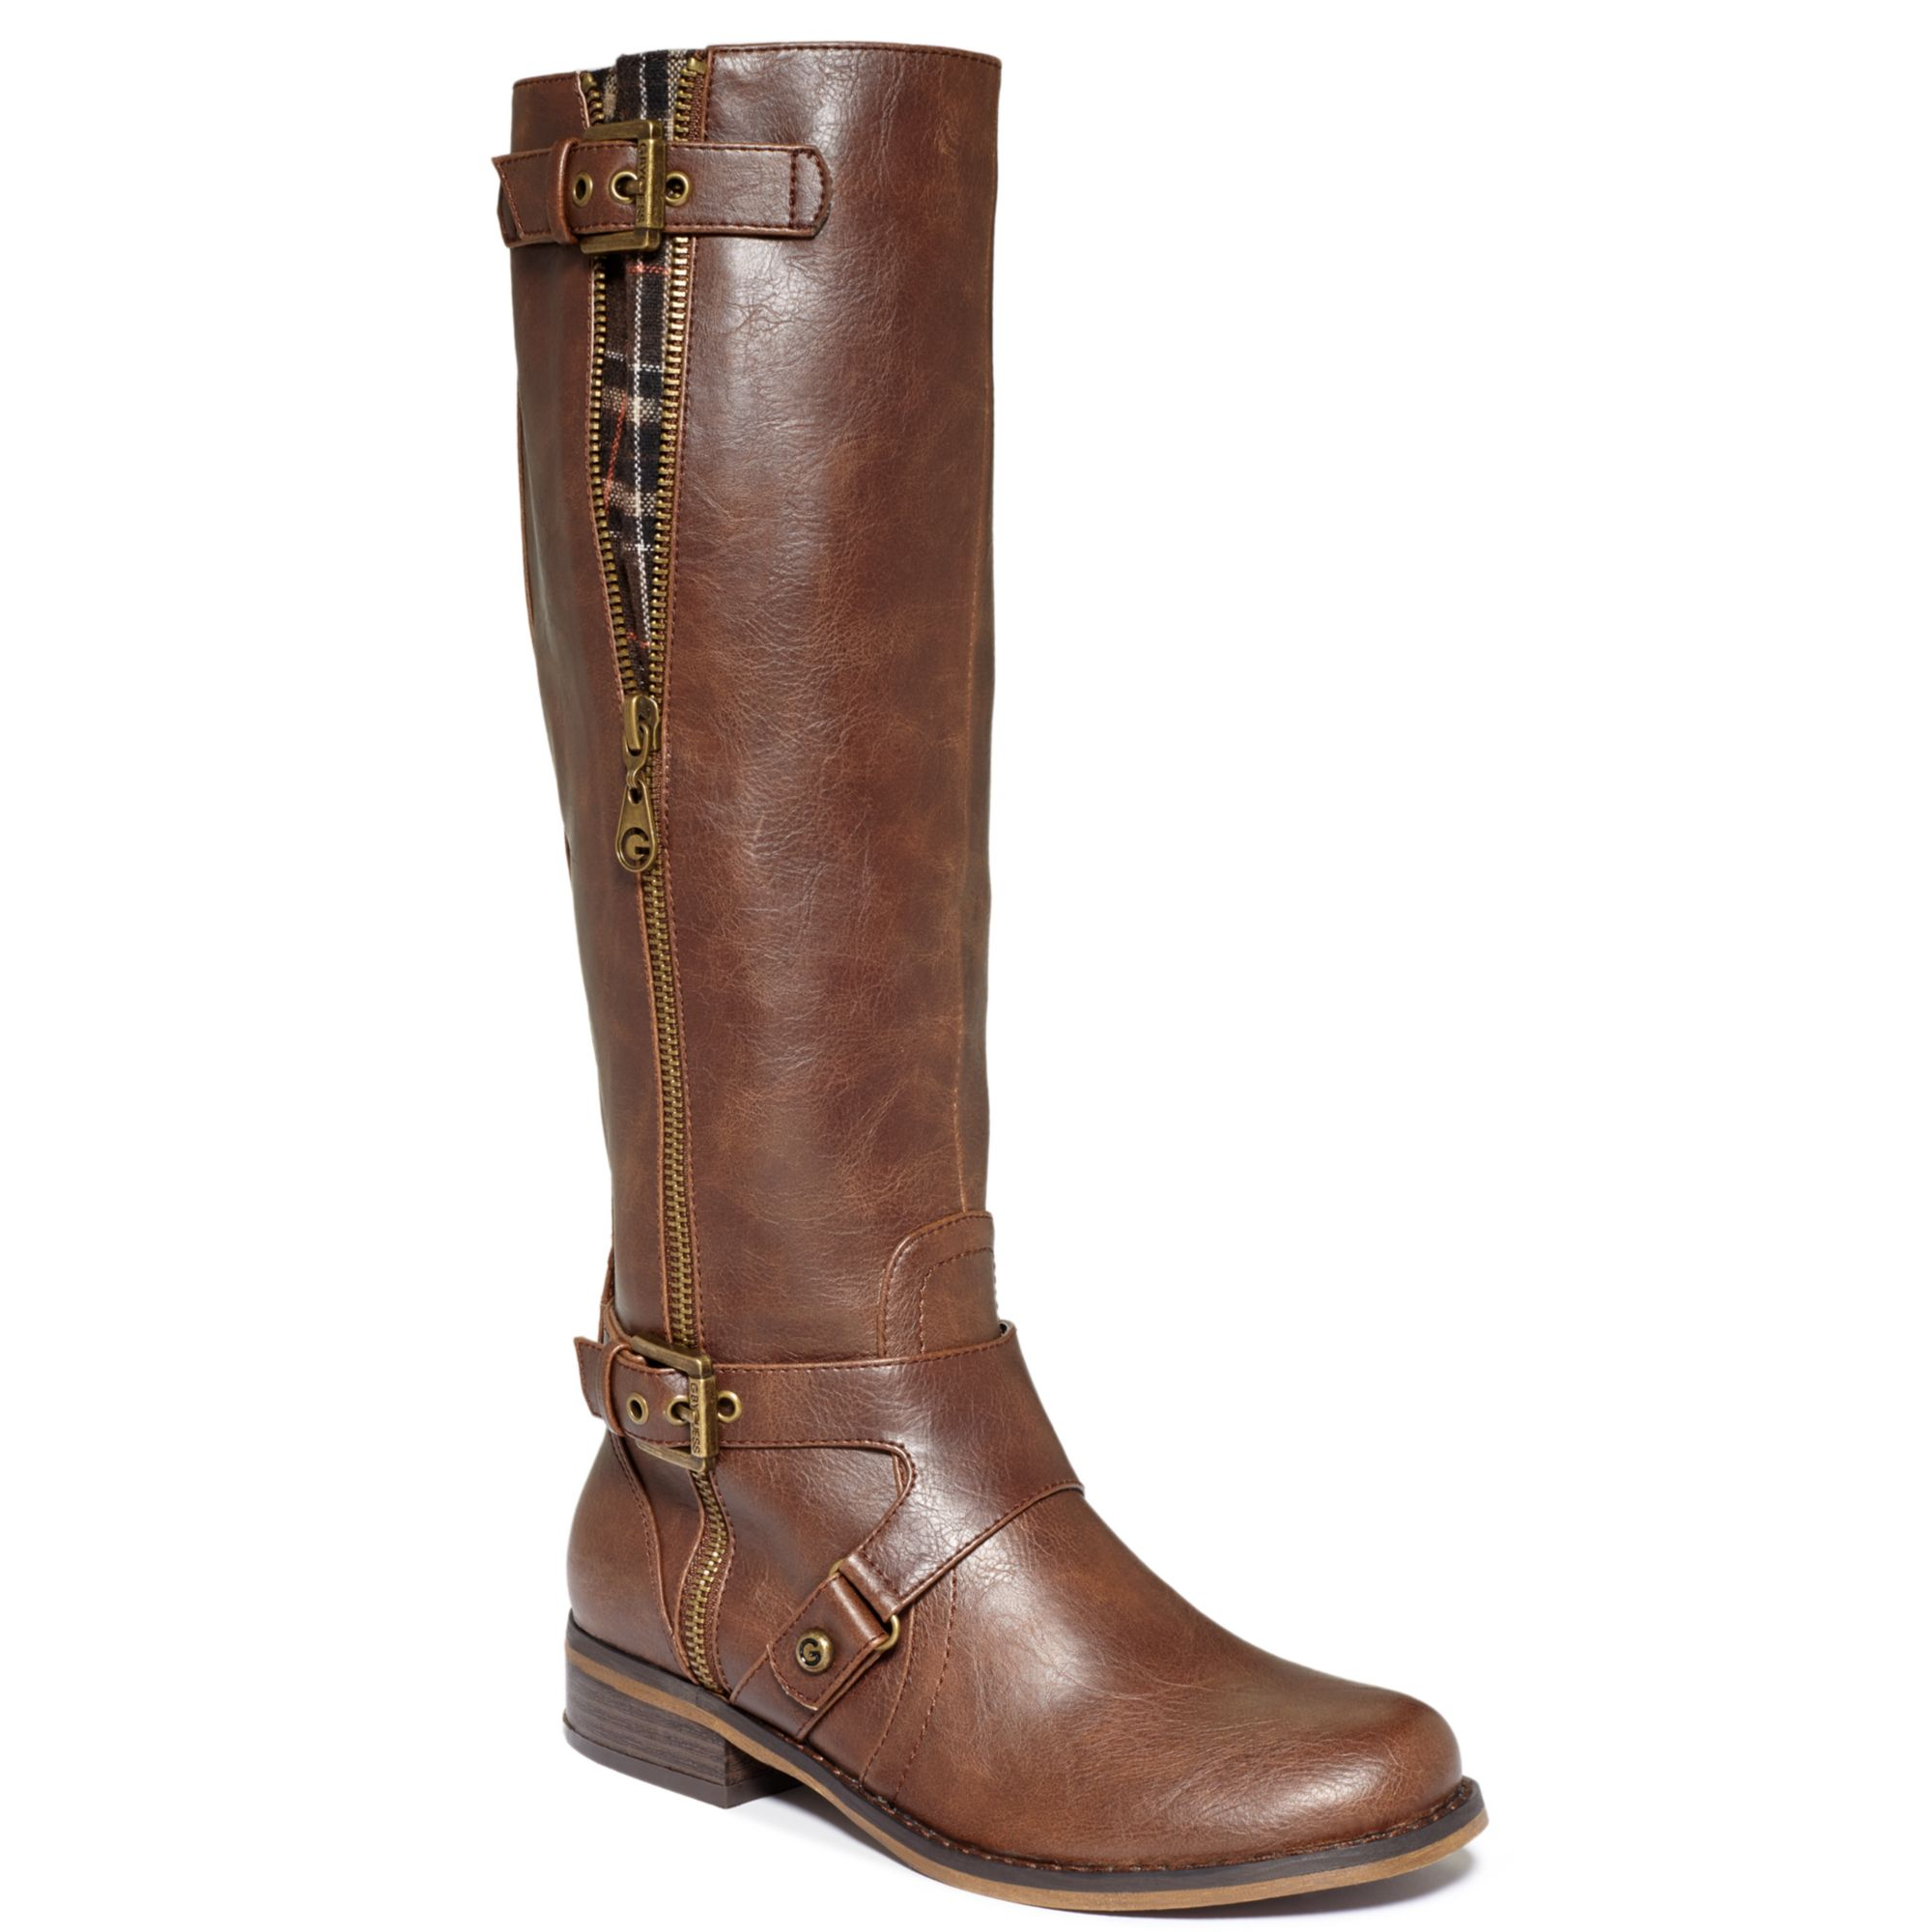 G by Guess Hertlez Tall Shaft Boots in Brown - Lyst